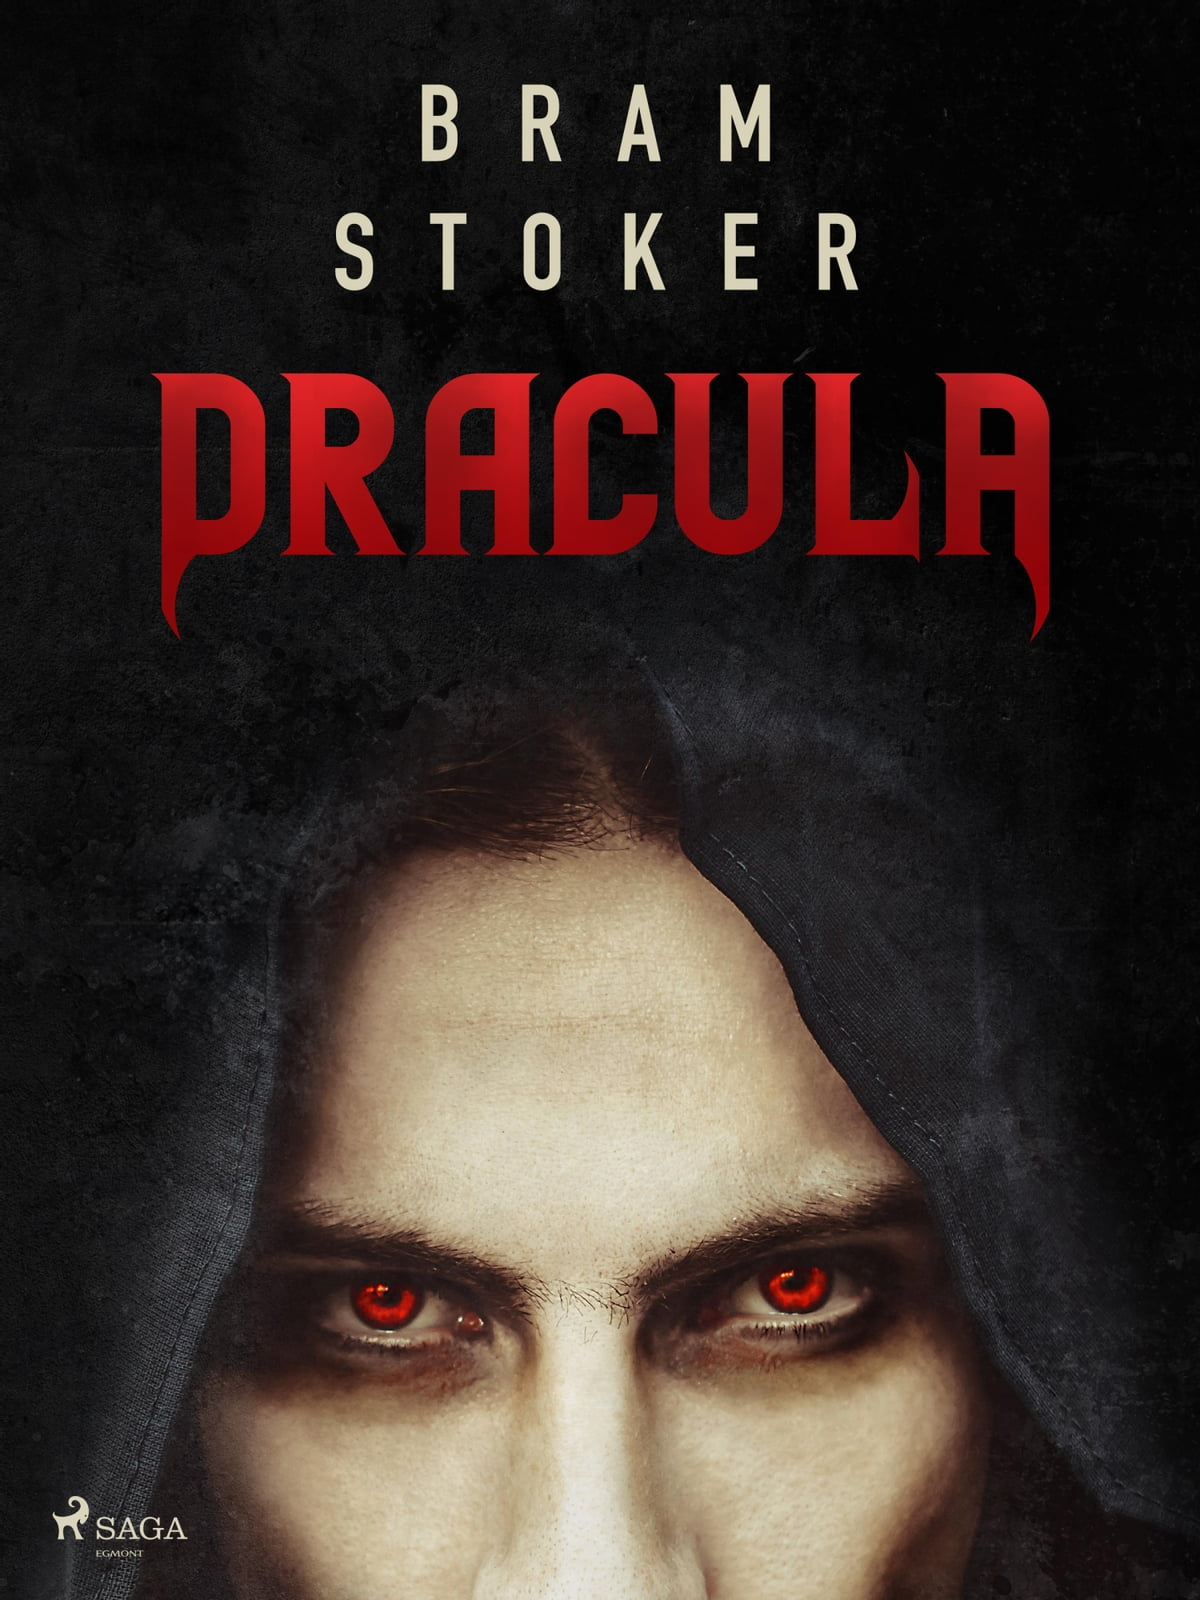 Image for Dracula Book Cover